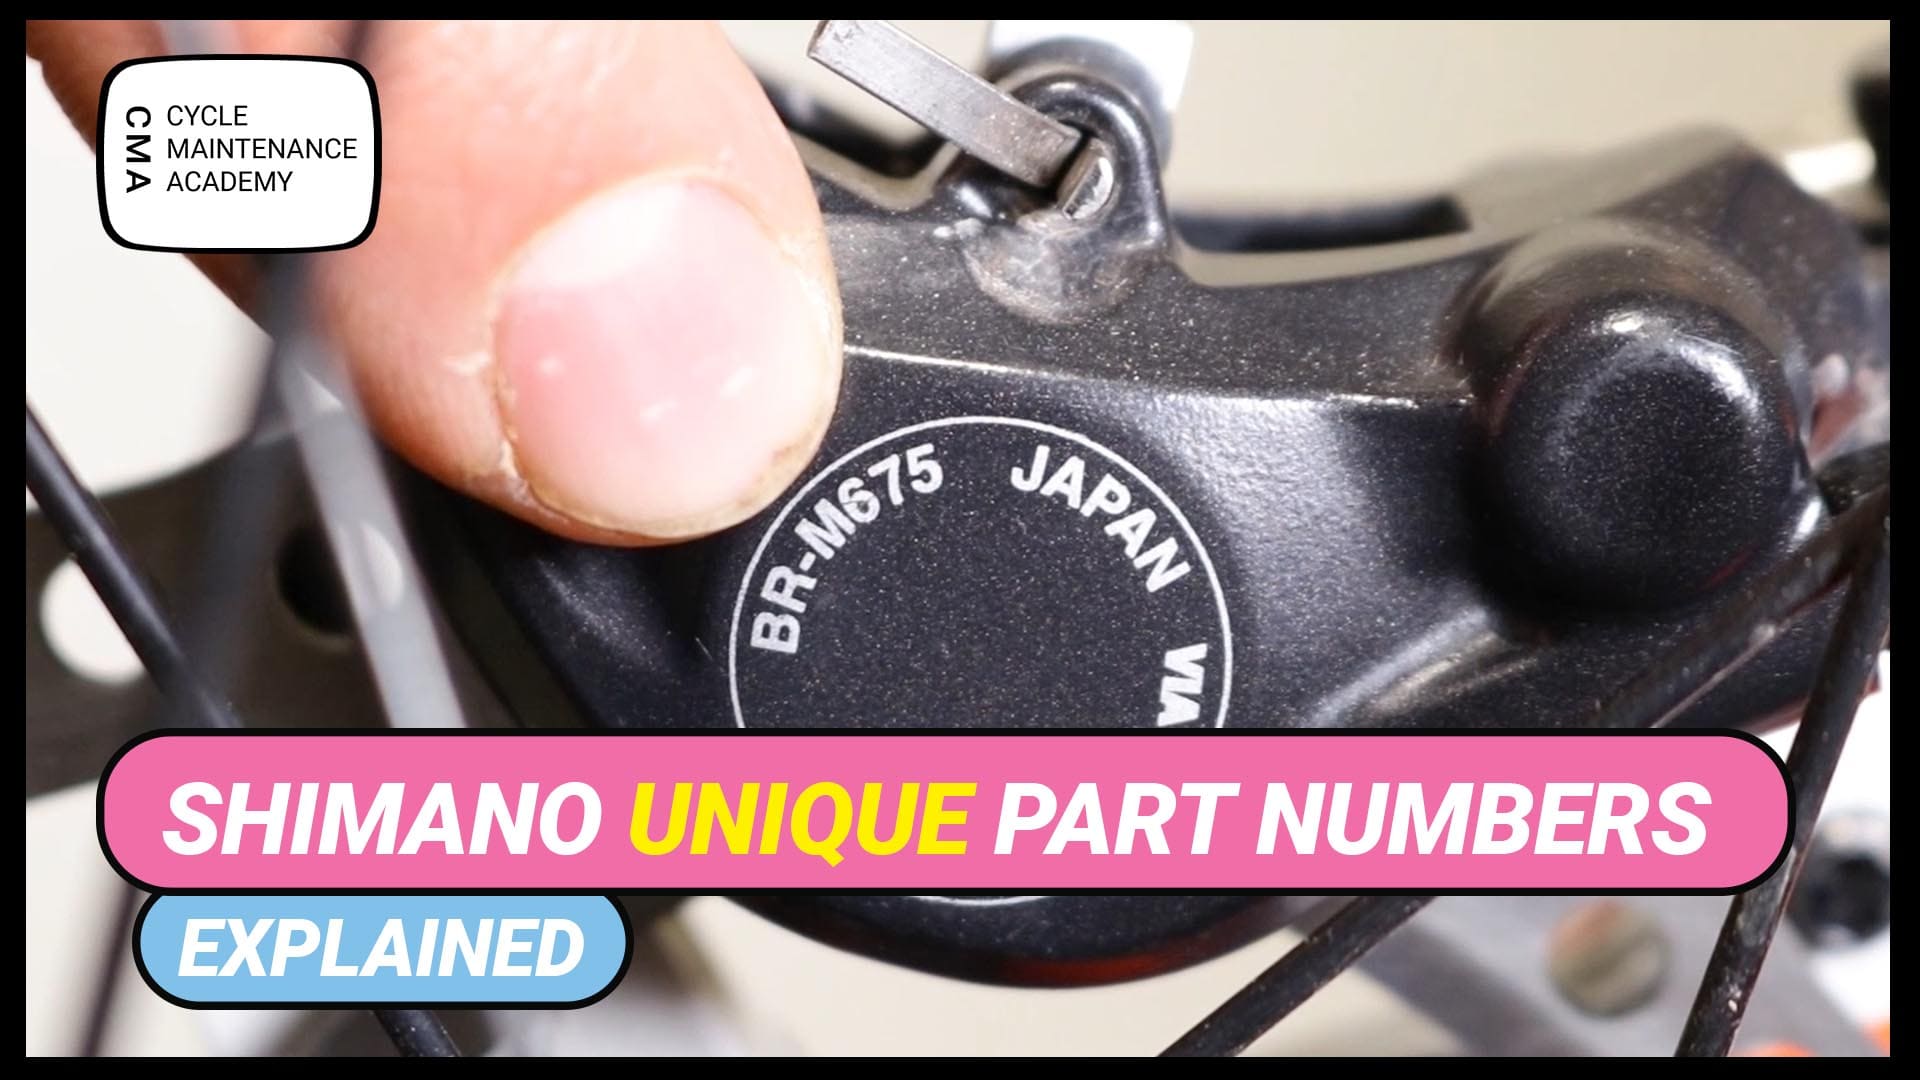 Shimano part numbers explained - Cycle Maintenance Academy